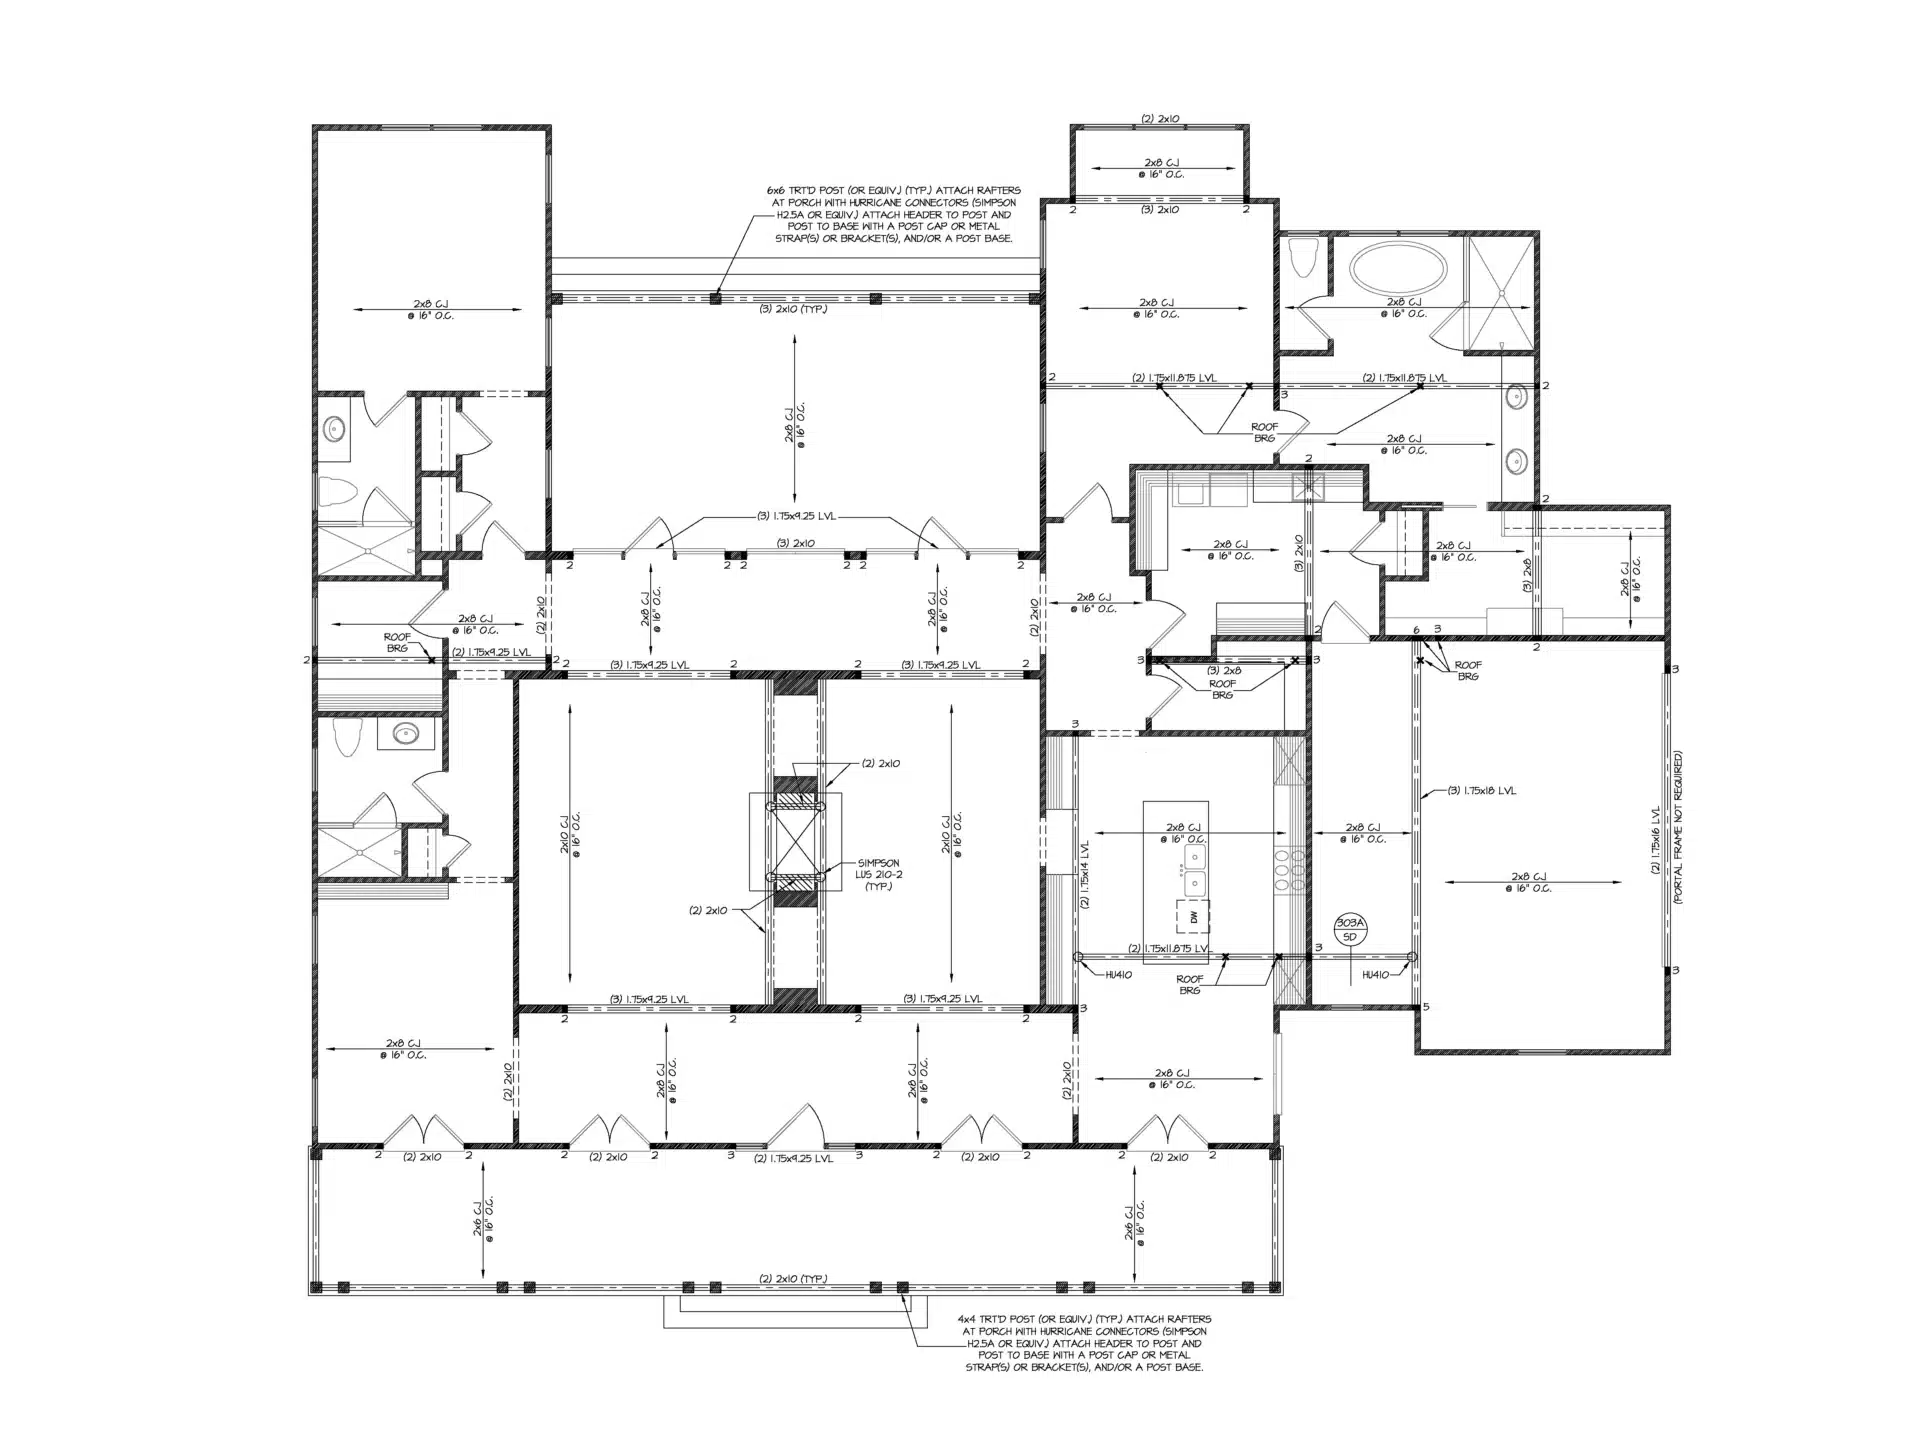 21-2844 my home floor plans_Page_08